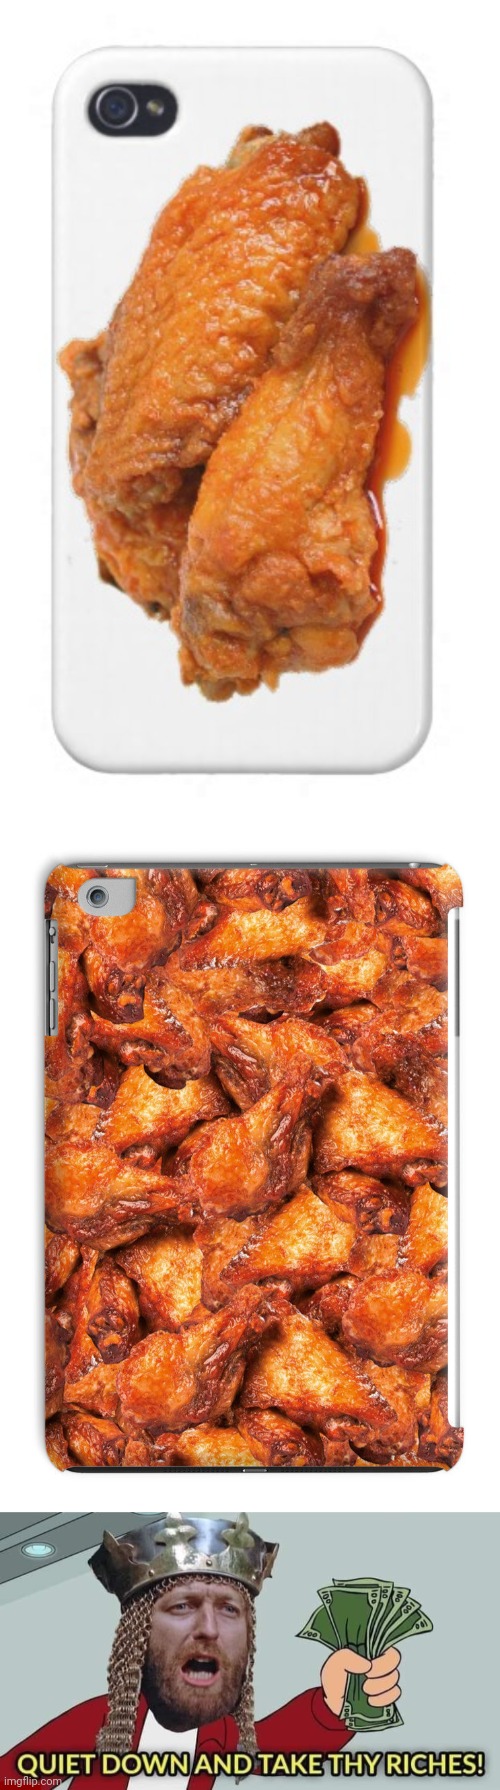 Buffalo wings phone cases | image tagged in quiet down and take thy riches,buffalo wings,phone case,phone cases,memes,hot wings | made w/ Imgflip meme maker